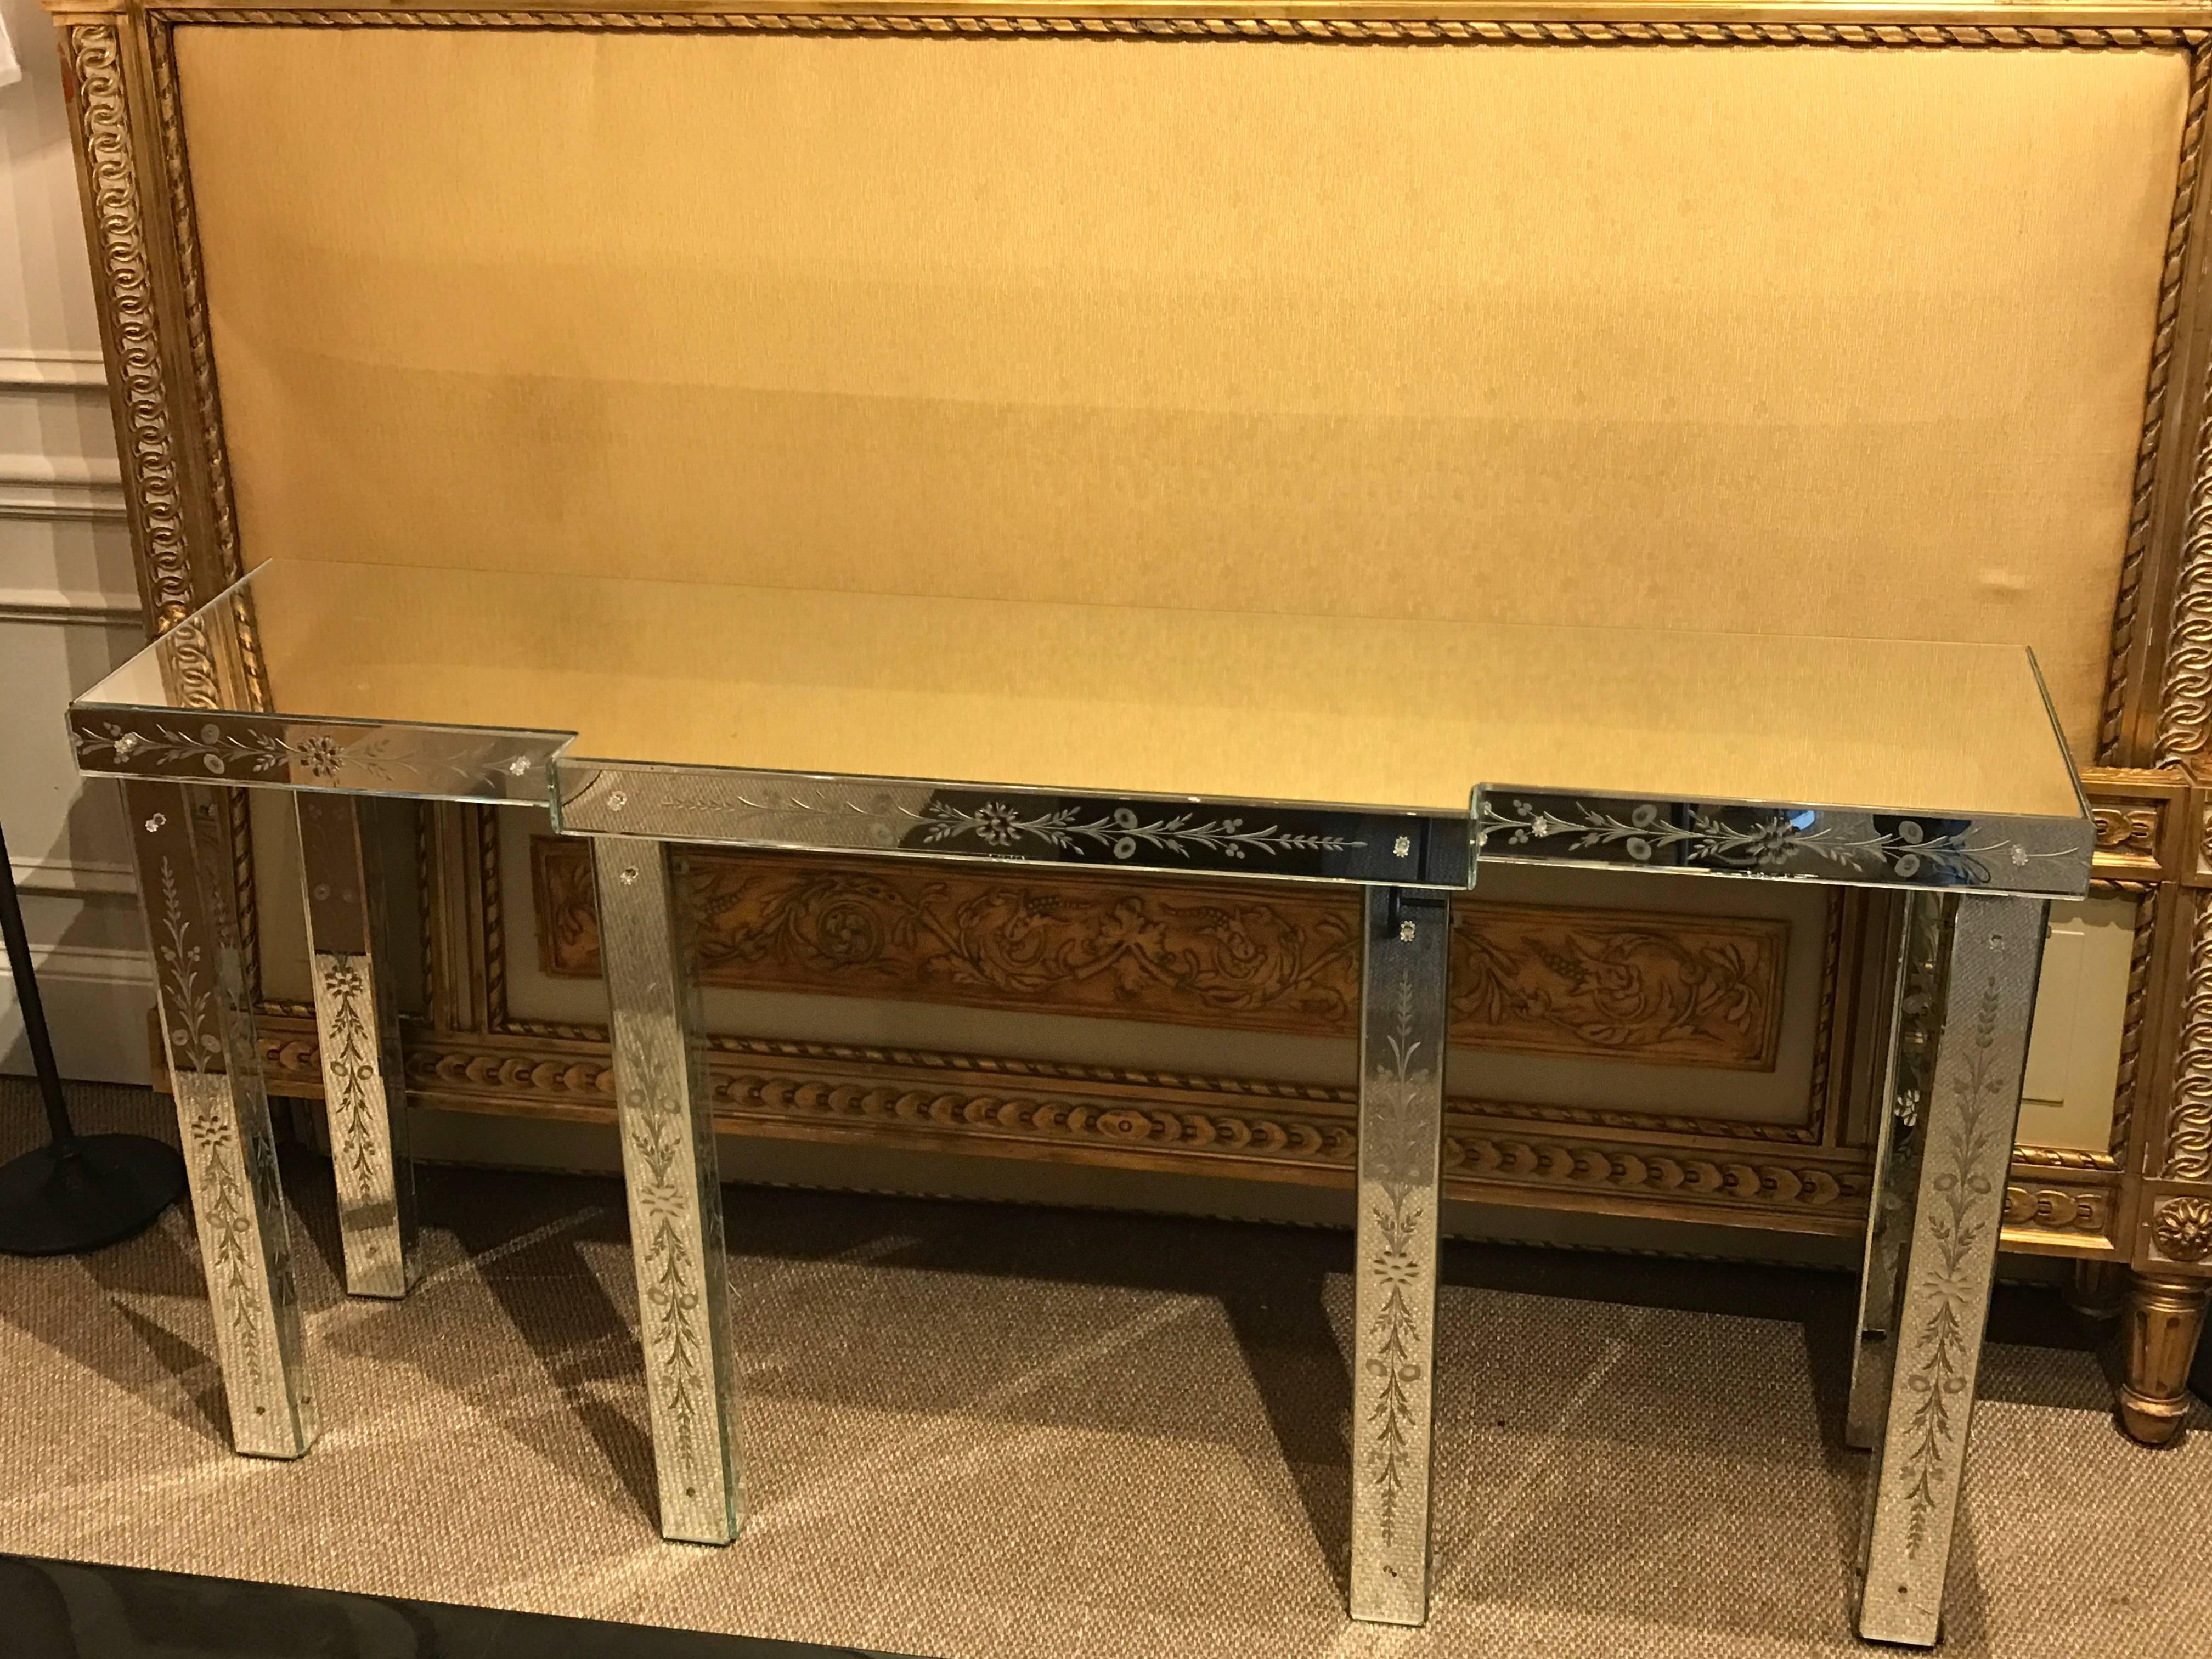 20th Century Venetian Engraved Mirrored Console